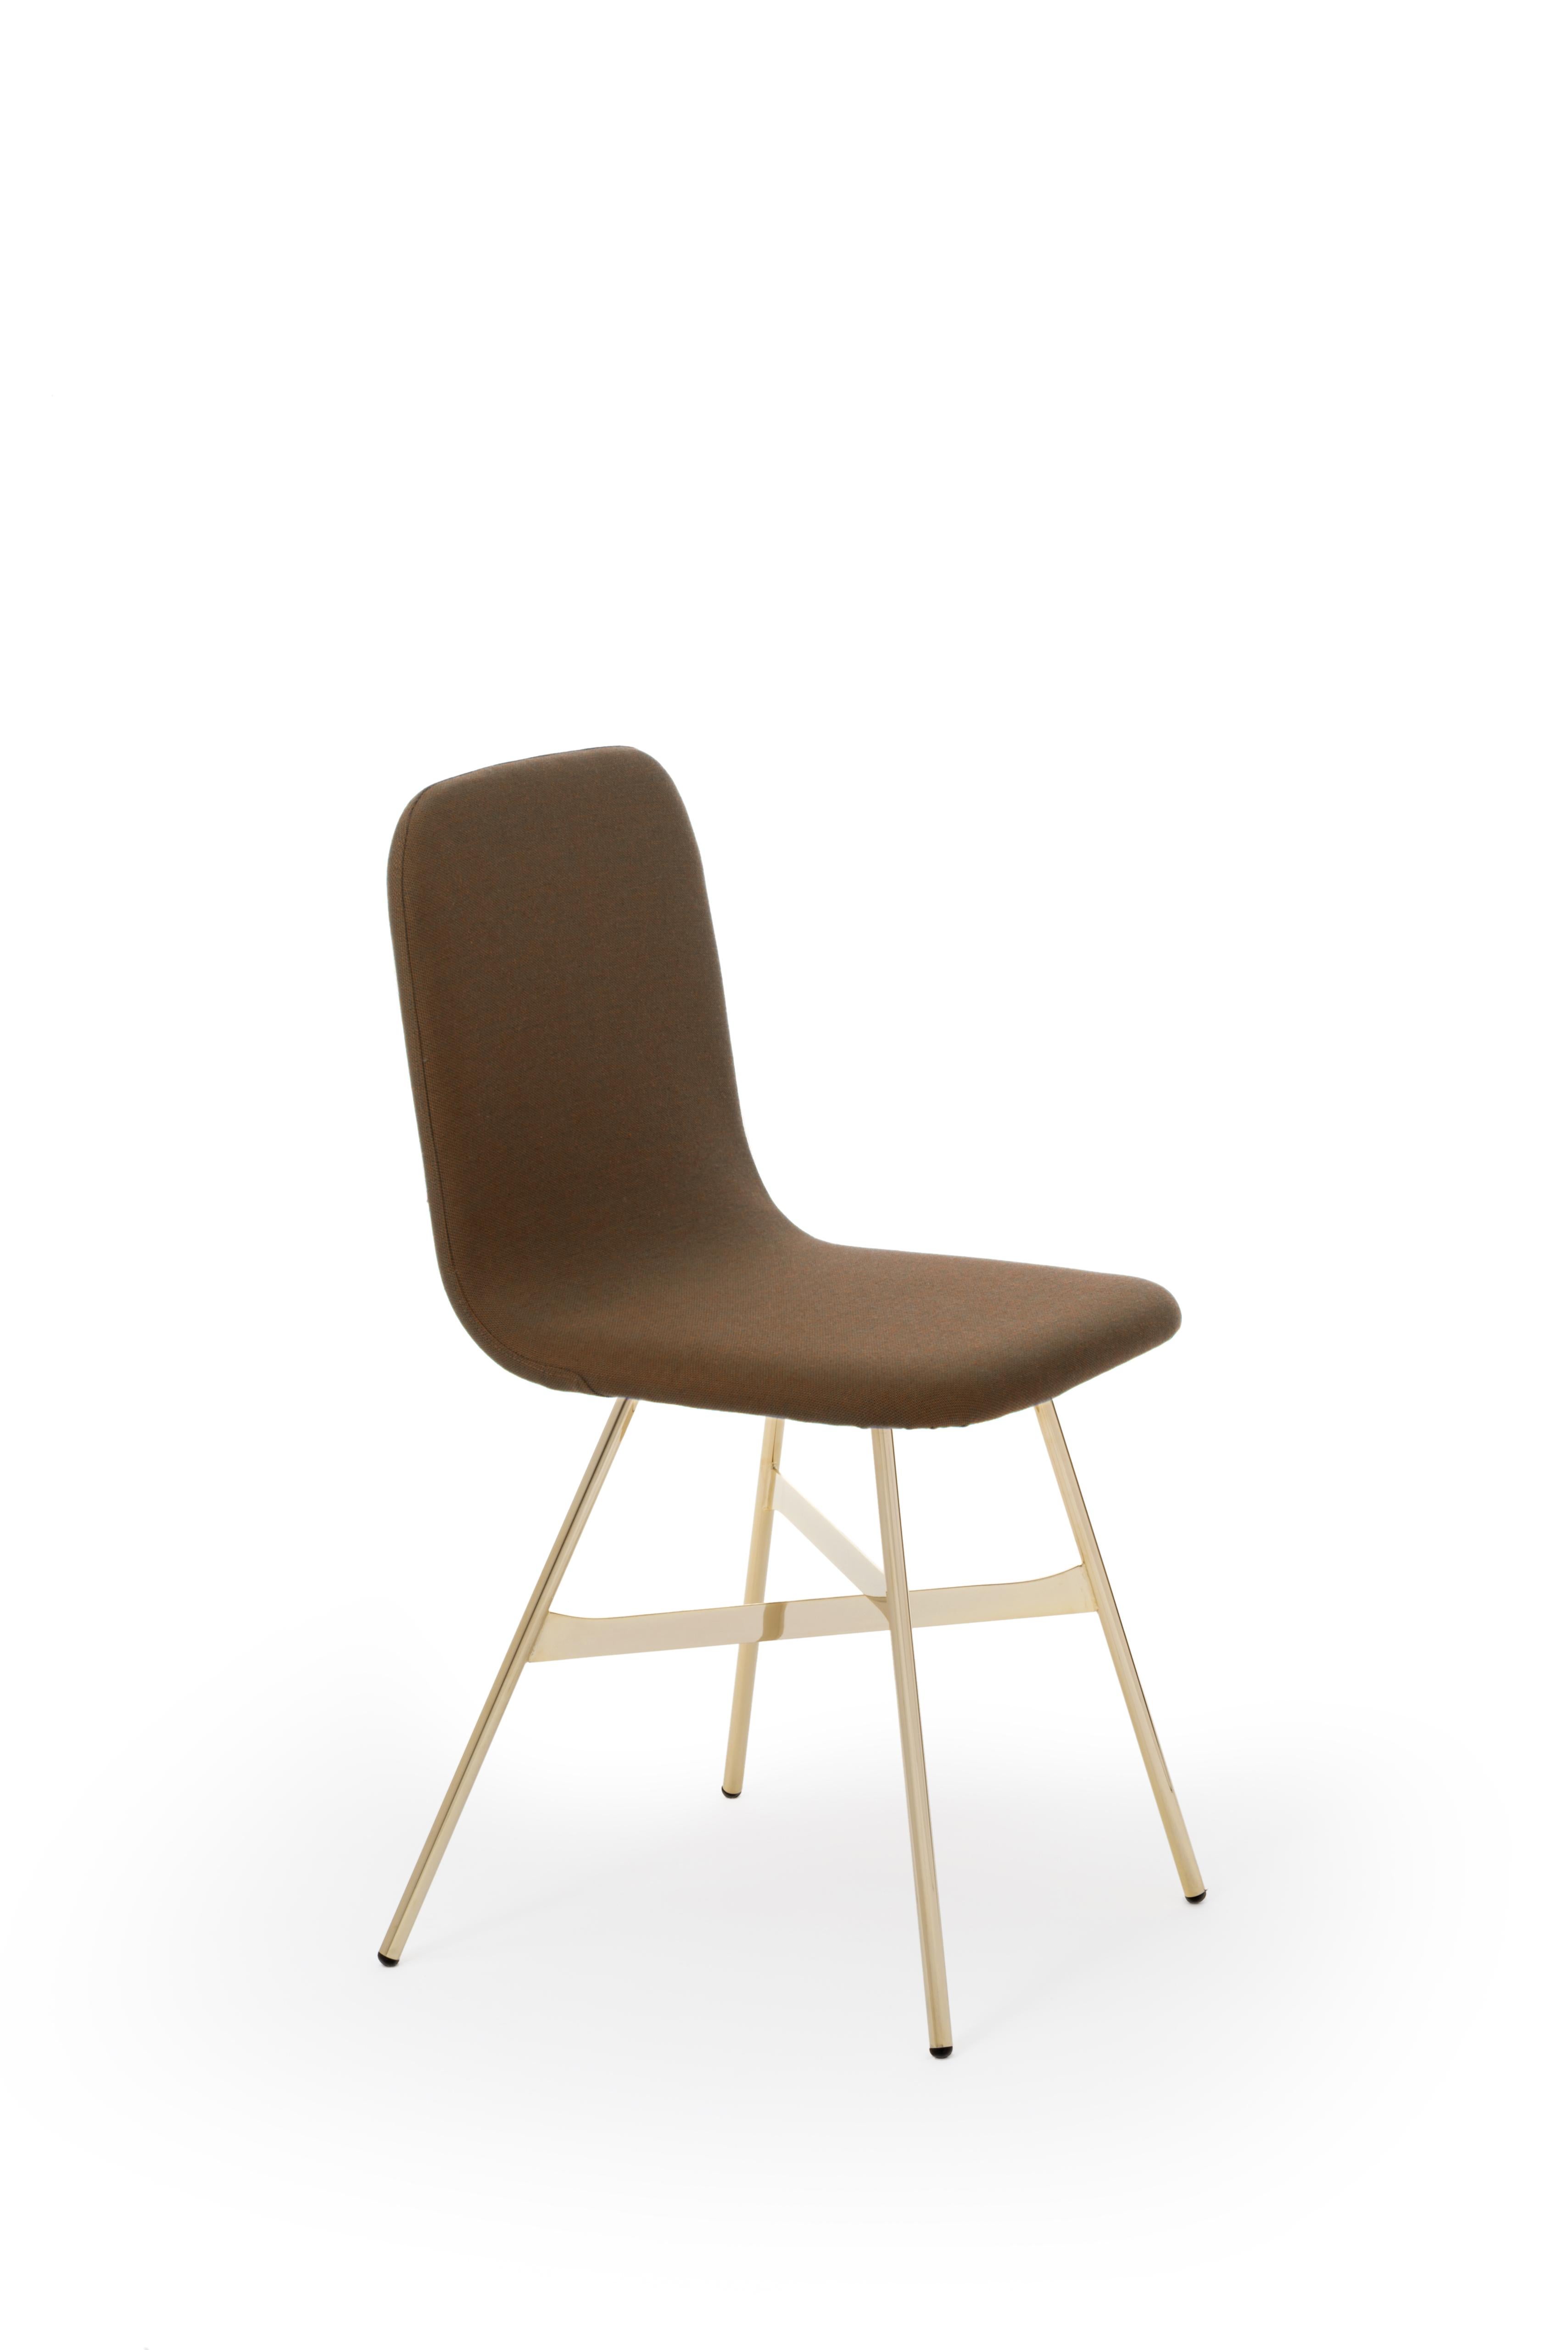 Minimalist Tria Simple Chair Golden Legs Upholstered in Fine Palm Green Wool, Made in Italy For Sale